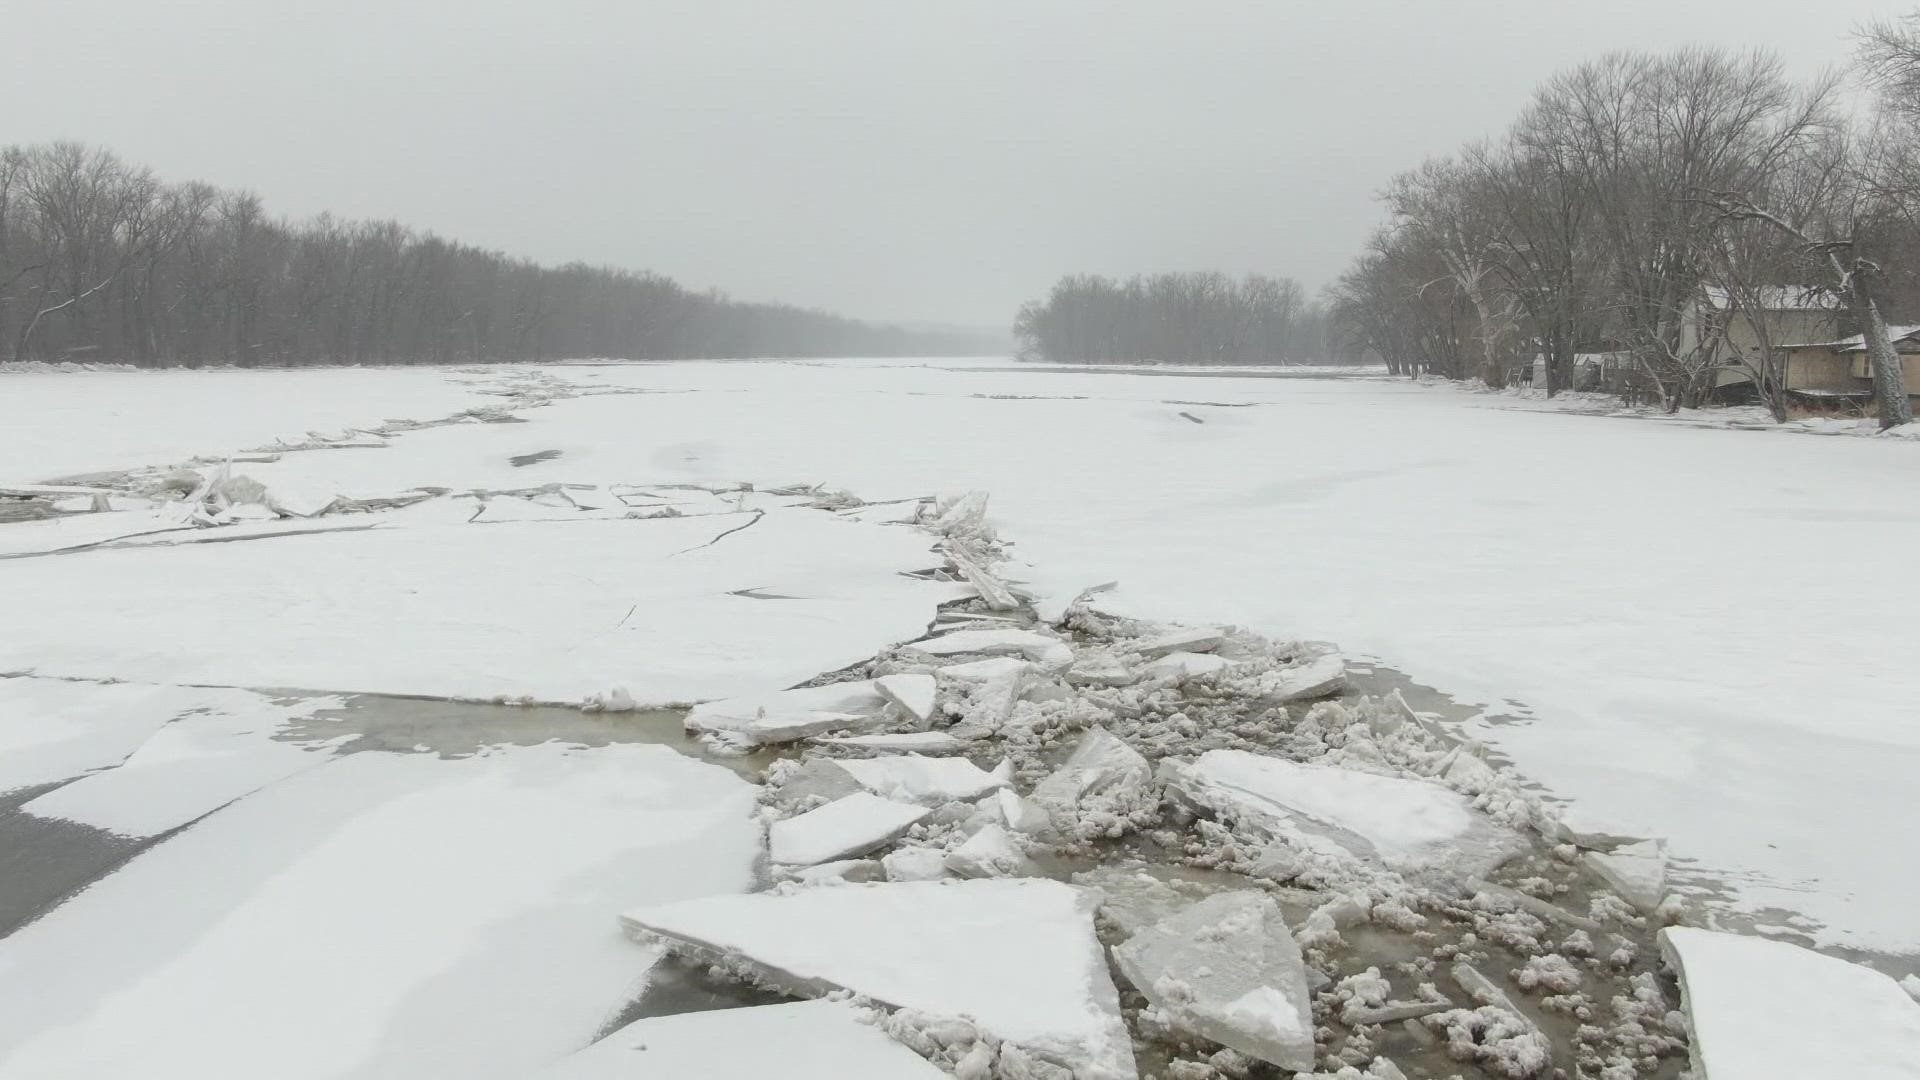 The National Weather Service issued a Flood Warning due to the ice jam on Jan. 5.